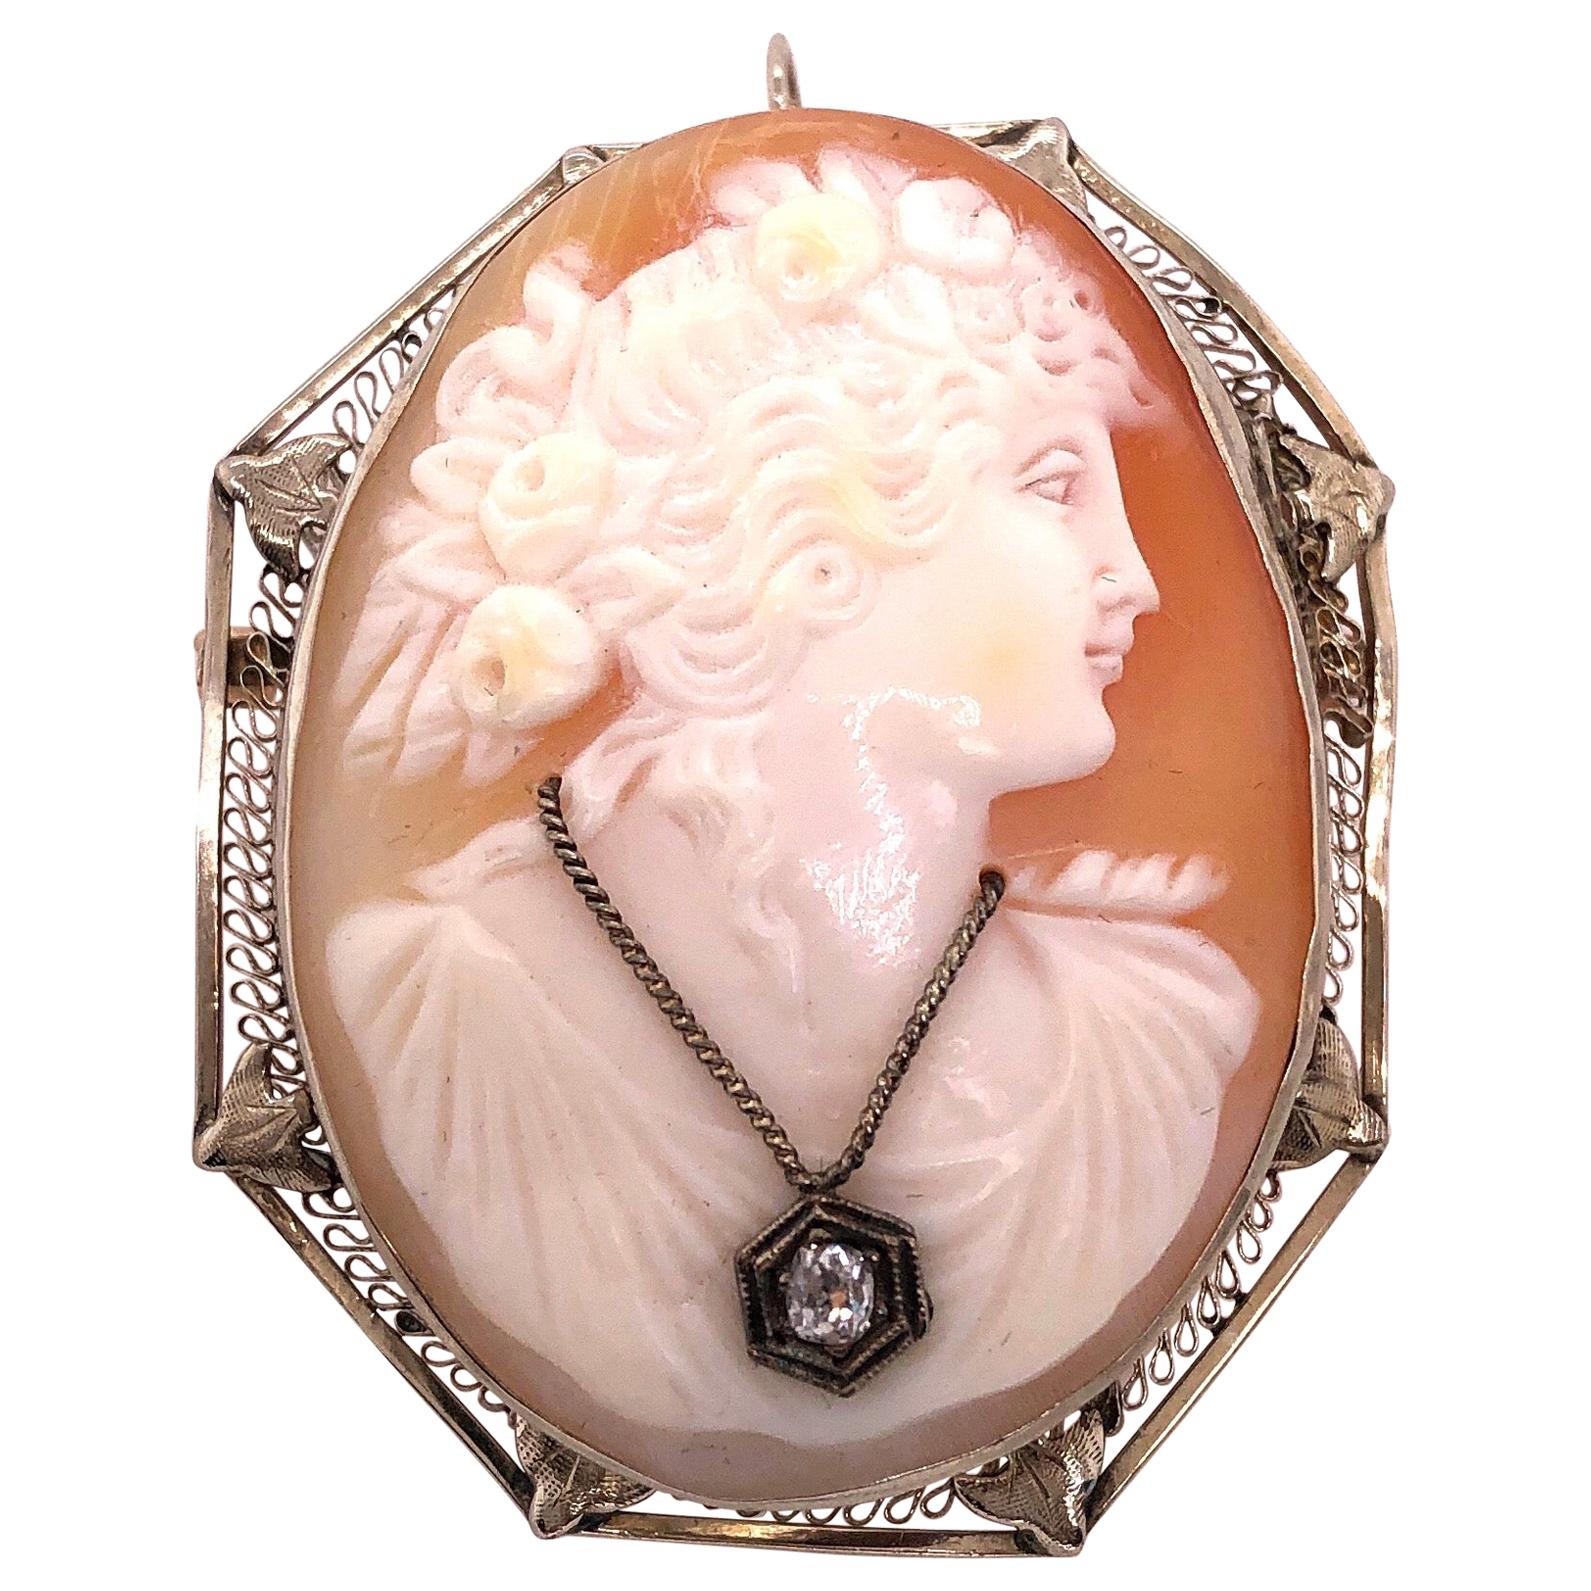 14 Karat White Gold Cameo Brooch and Pendant Woman Profile with Diamond Necklace